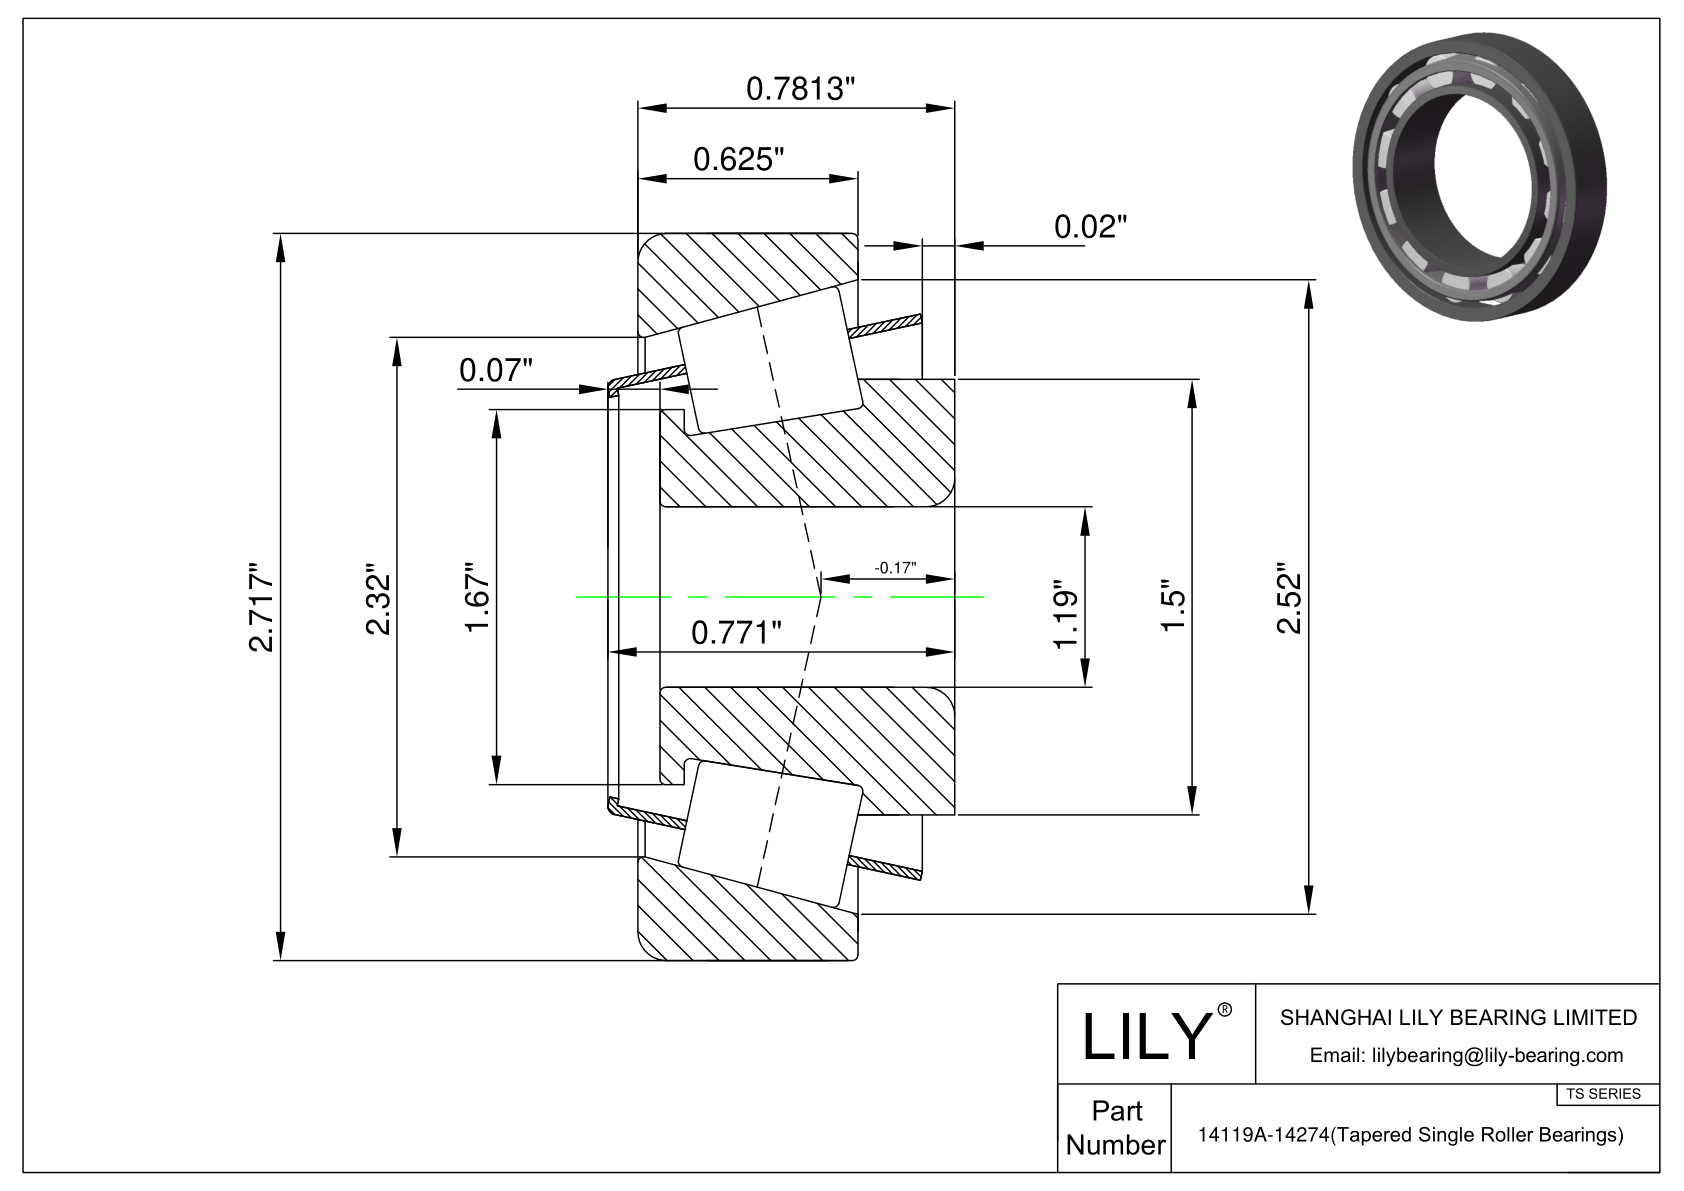 14119A-14274 TS (Tapered Single Roller Bearings) (Imperial) cad drawing